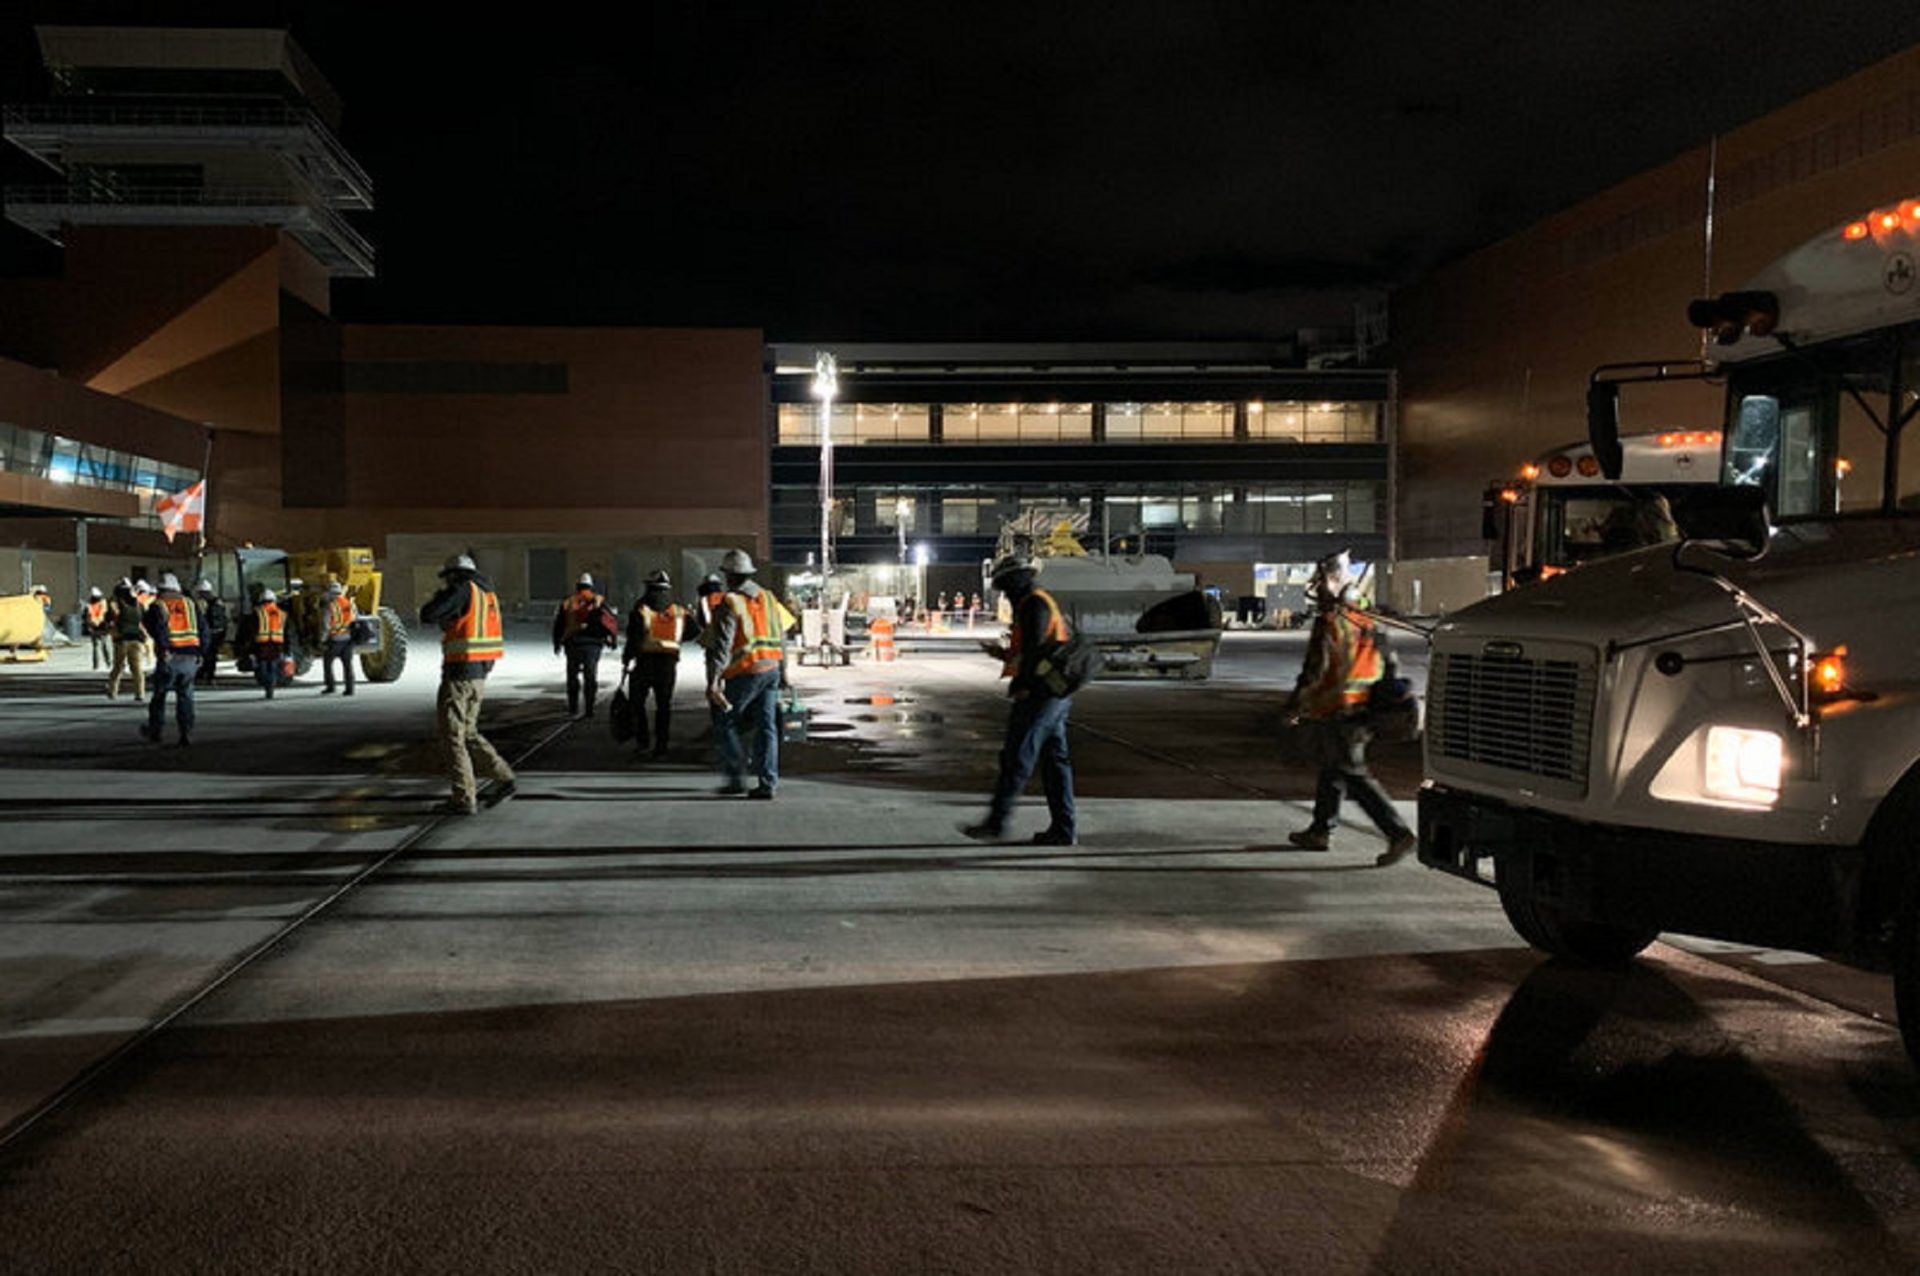 RK workers depart a bus on their way to the job site at a new airport under construction in Salt Lake City.